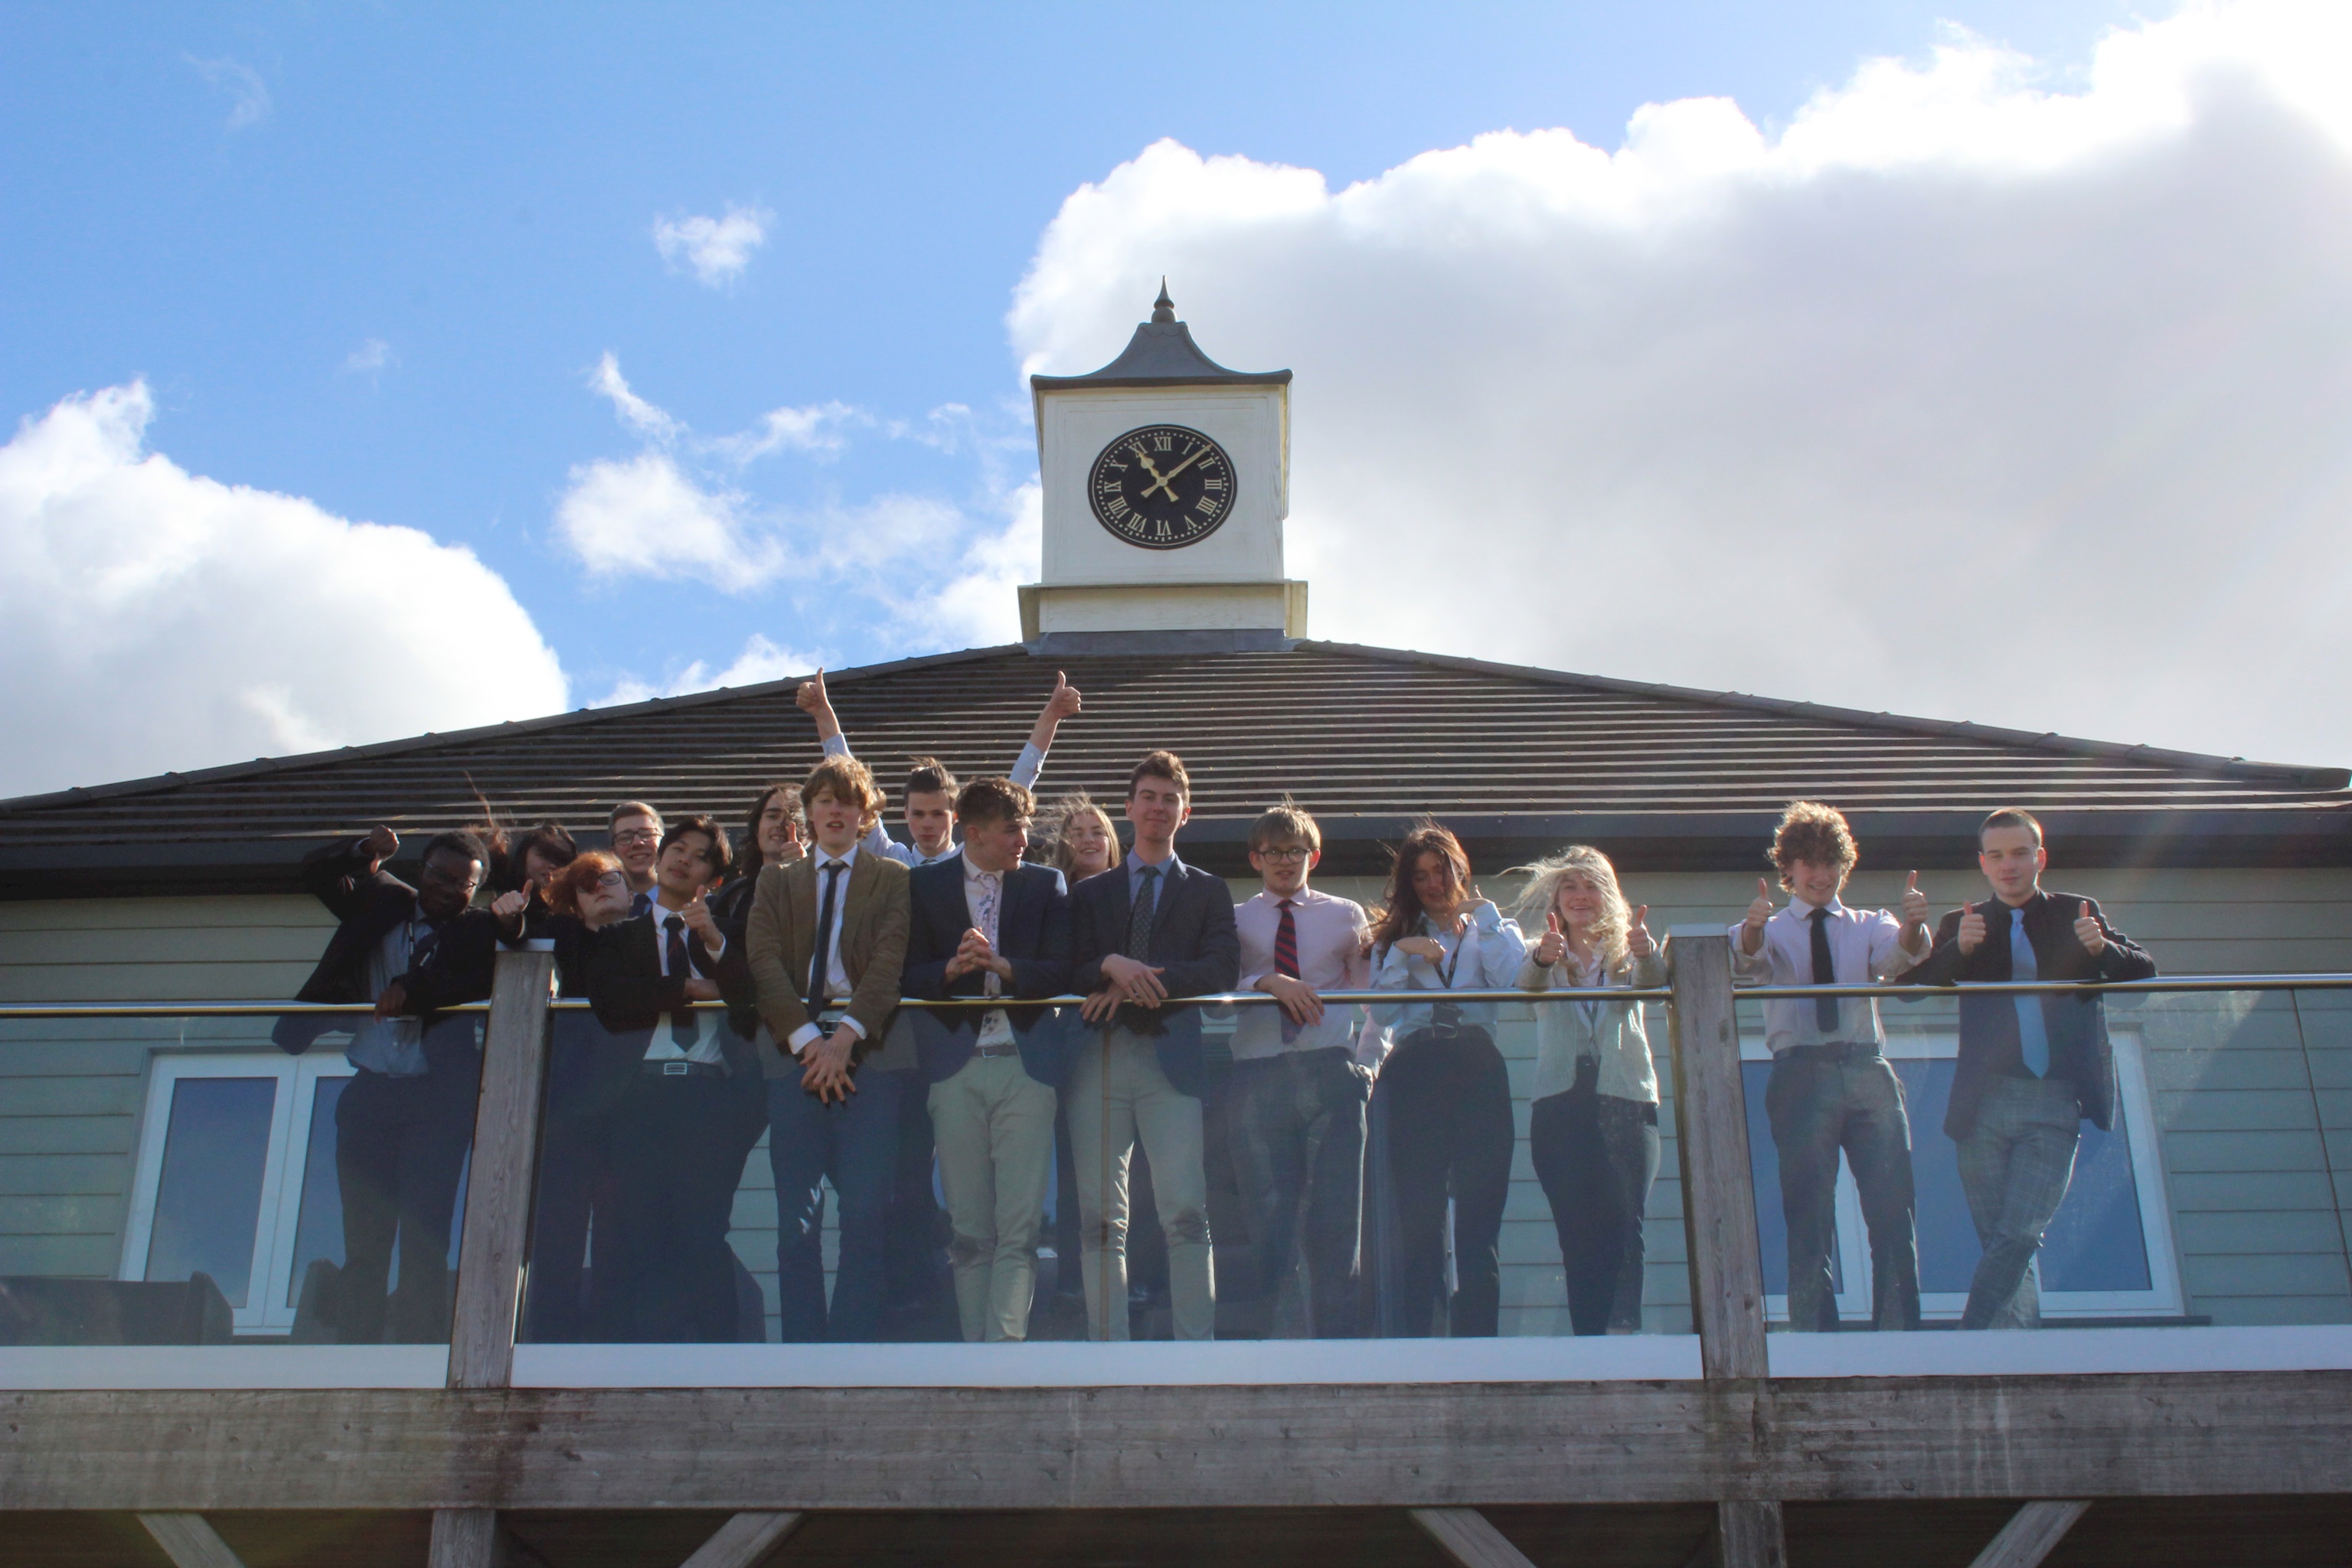 Farewell to our wonderful Upper Sixth!